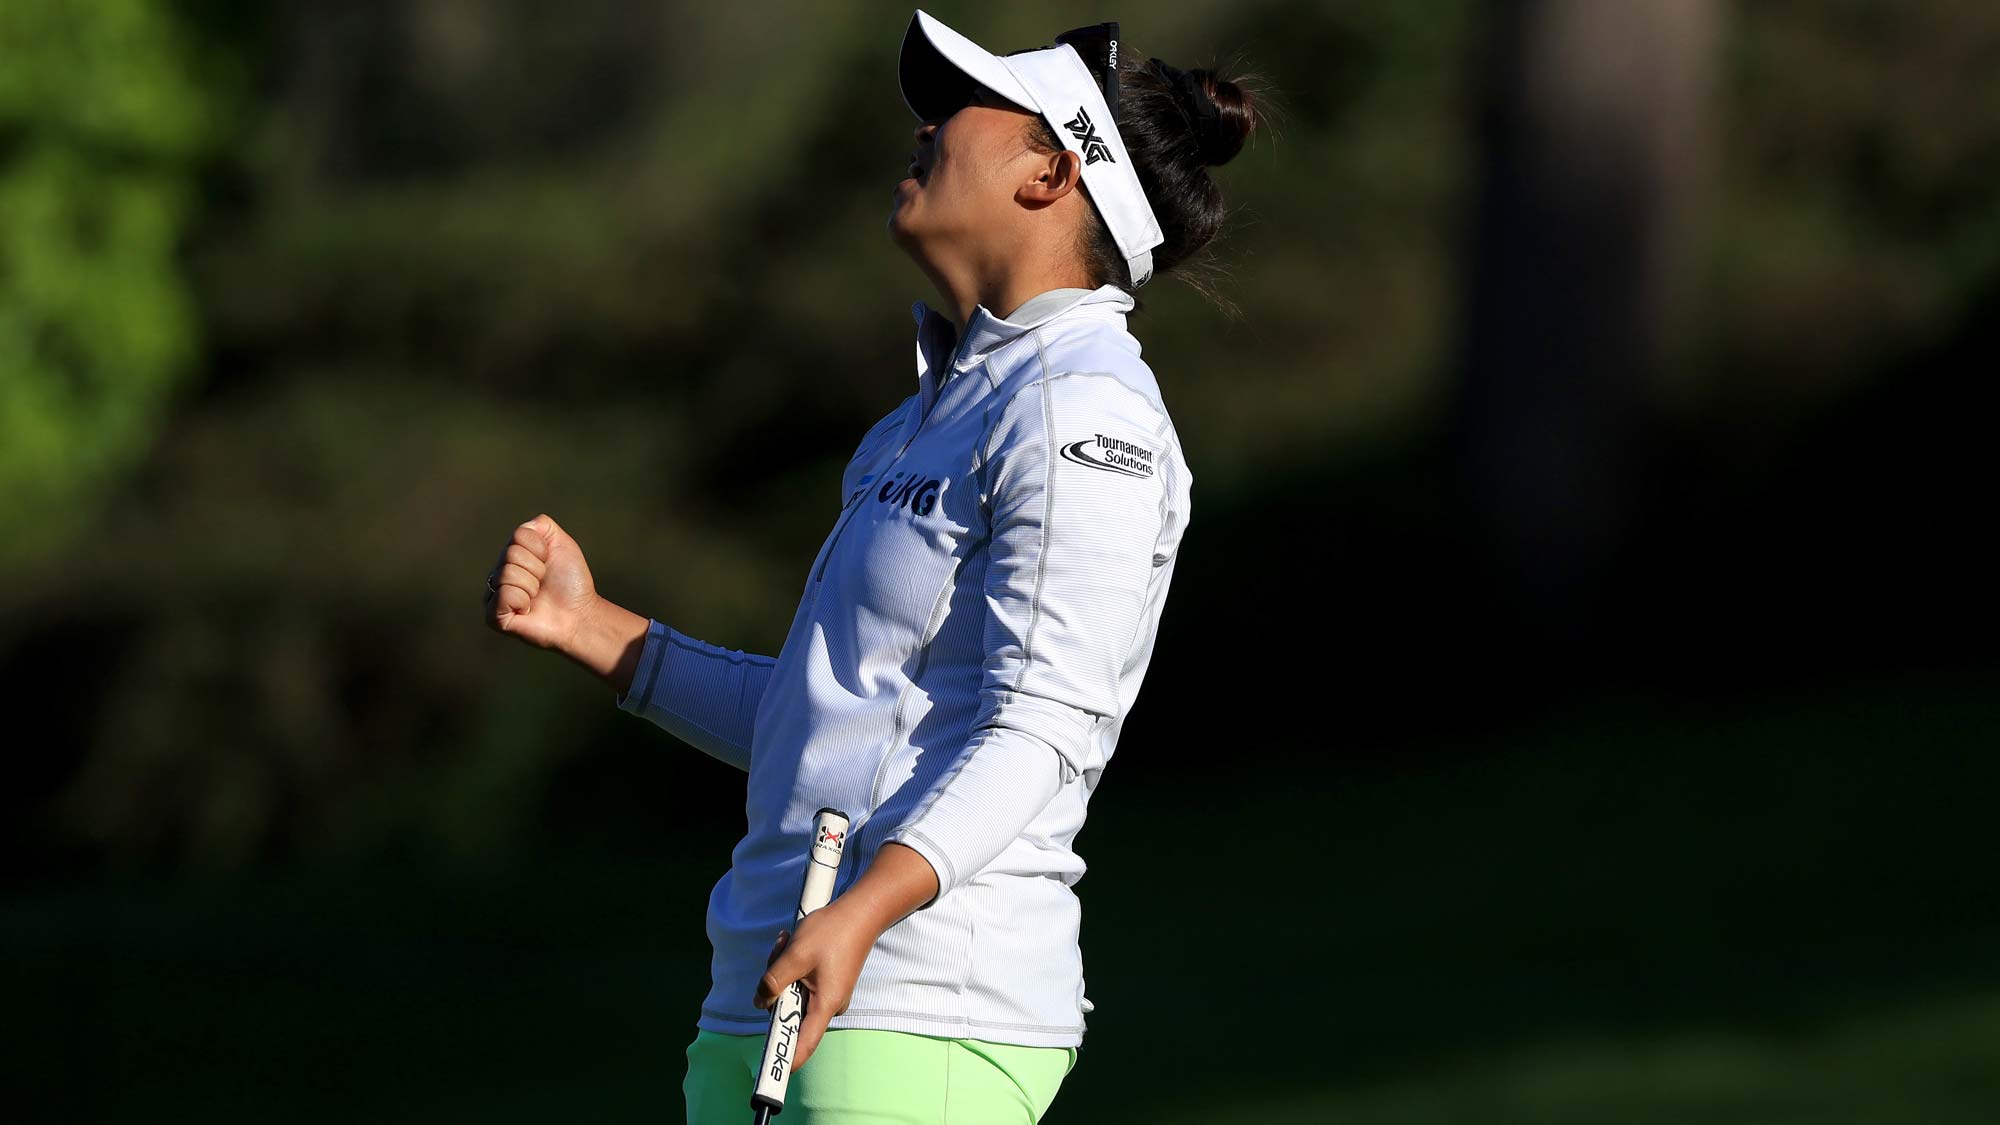 Megan Khang of the United States reacts to a putt on the 17th hole during the third round of the 76th U.S. Women's Open Championship